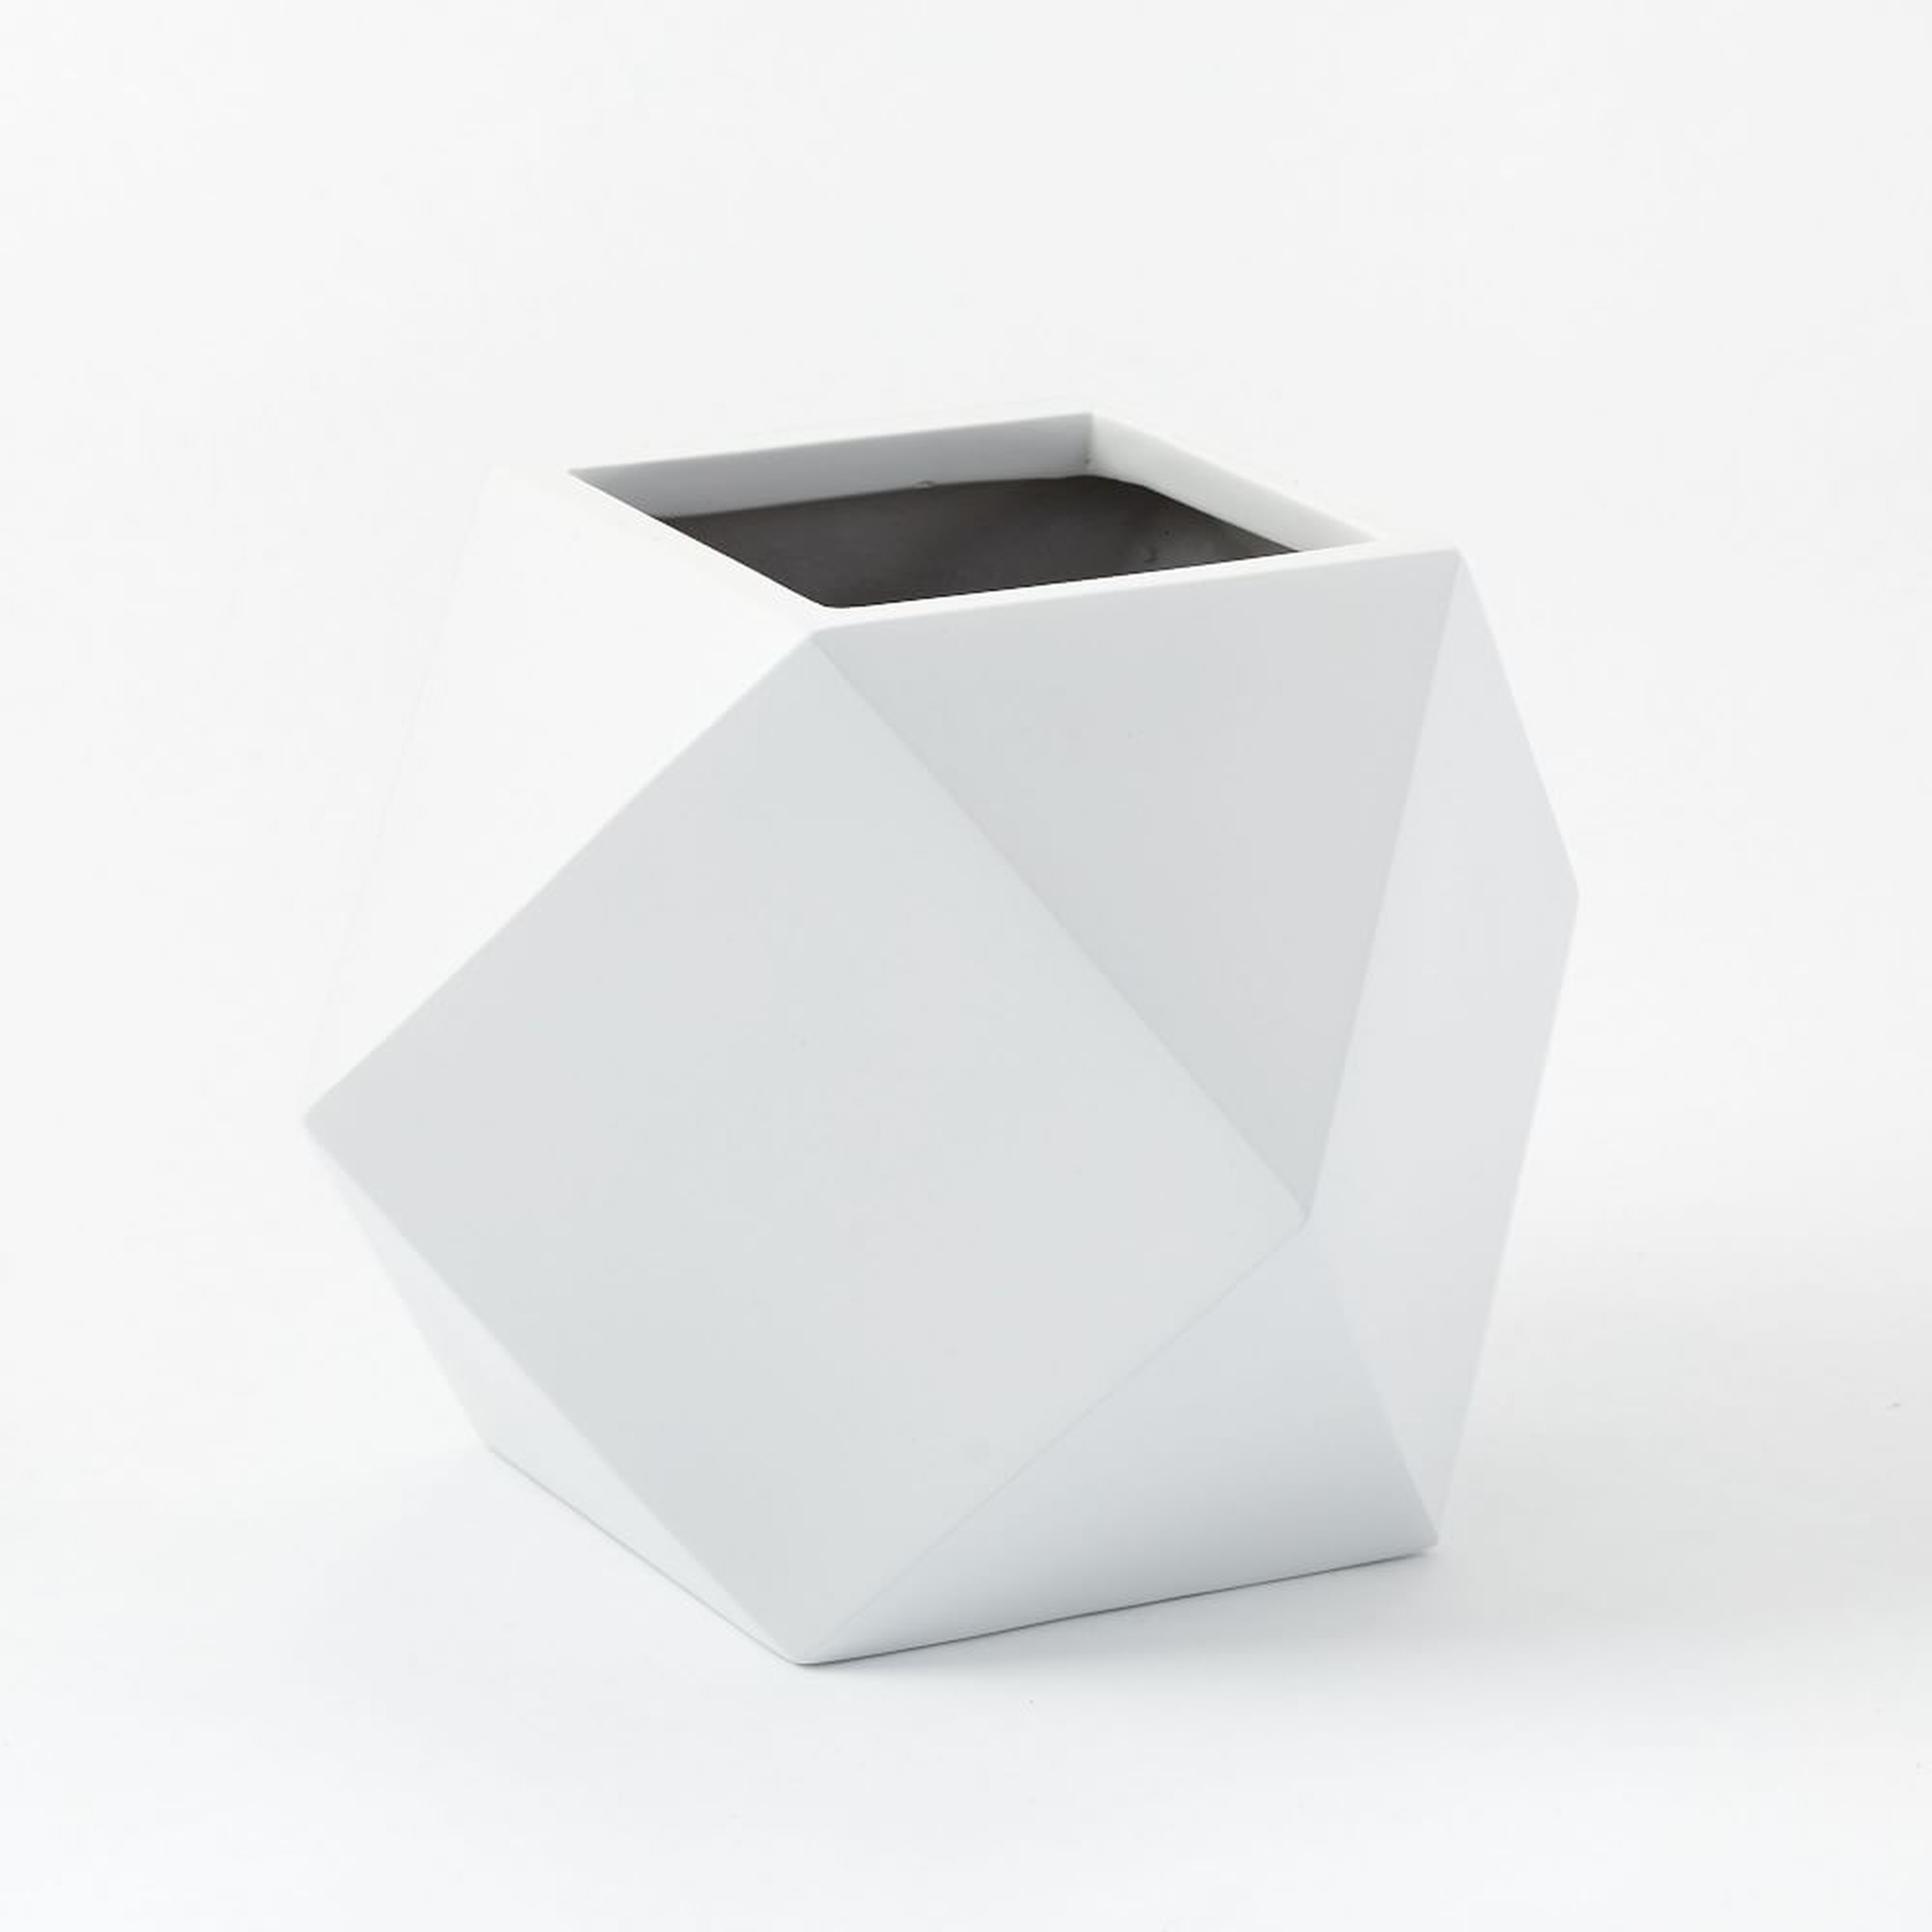 Faceted Modern Fiberstone Indoor/Outdoor Planter, Small, 12.5"W x 11"D x 10.5"H, White - West Elm